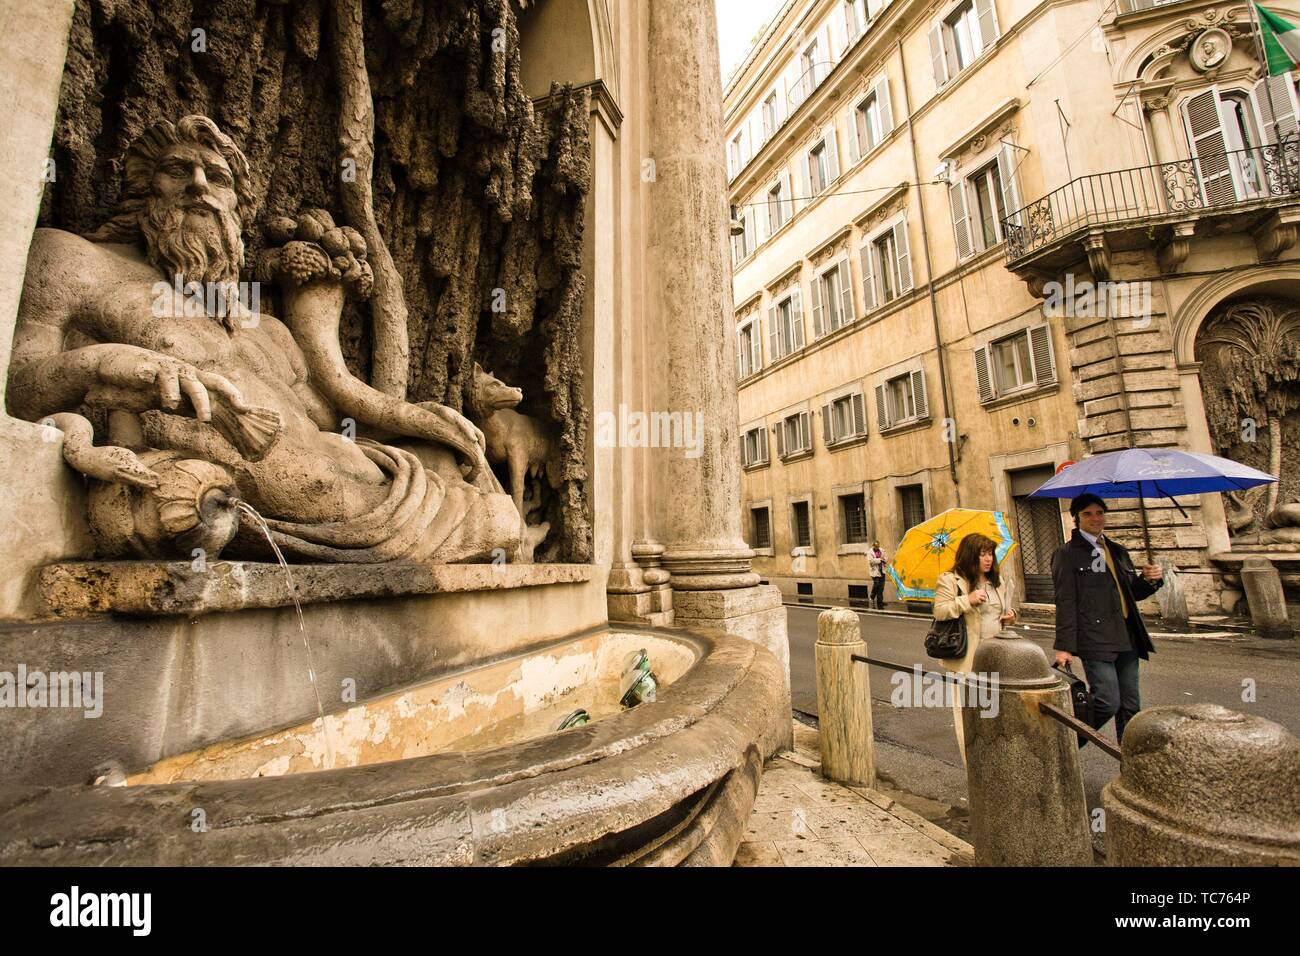 River Tiber, The Quattro Fontane, the Four Fountains is an ensemble of four Late Renaissance fountains located at the intersection of Via delle Stock Photo